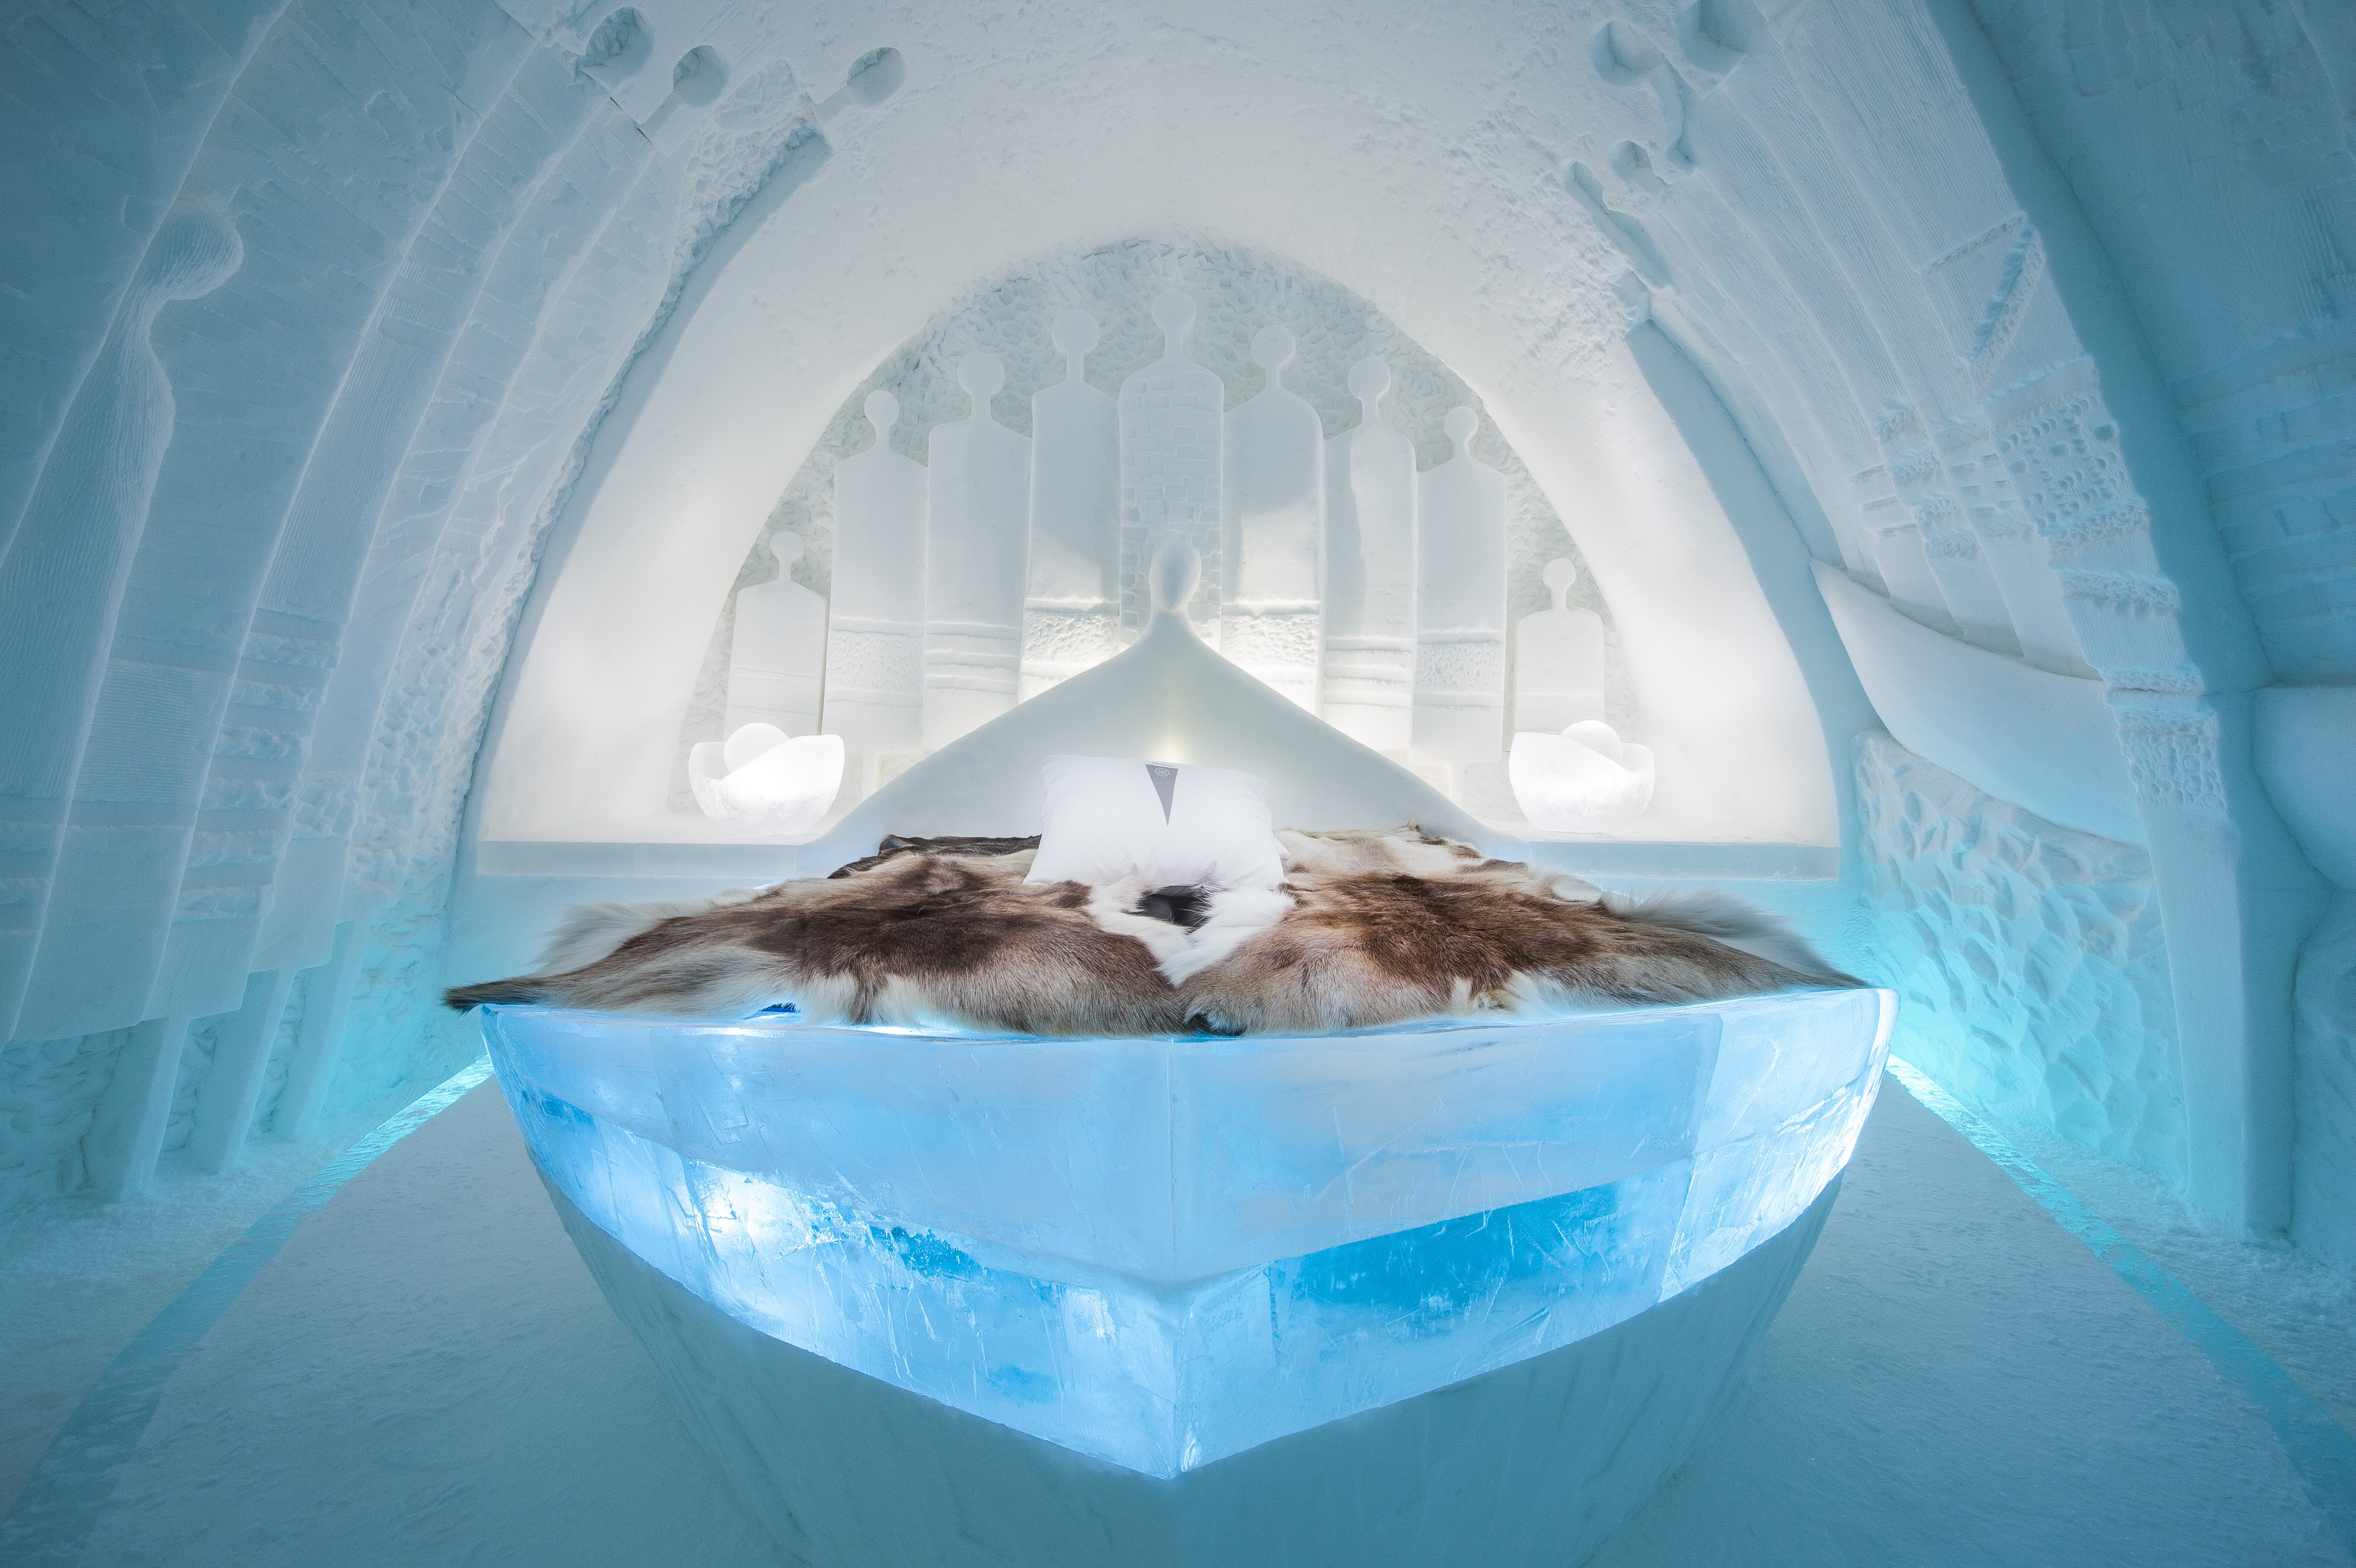 art-suite-daily-travellers-icehotel-28